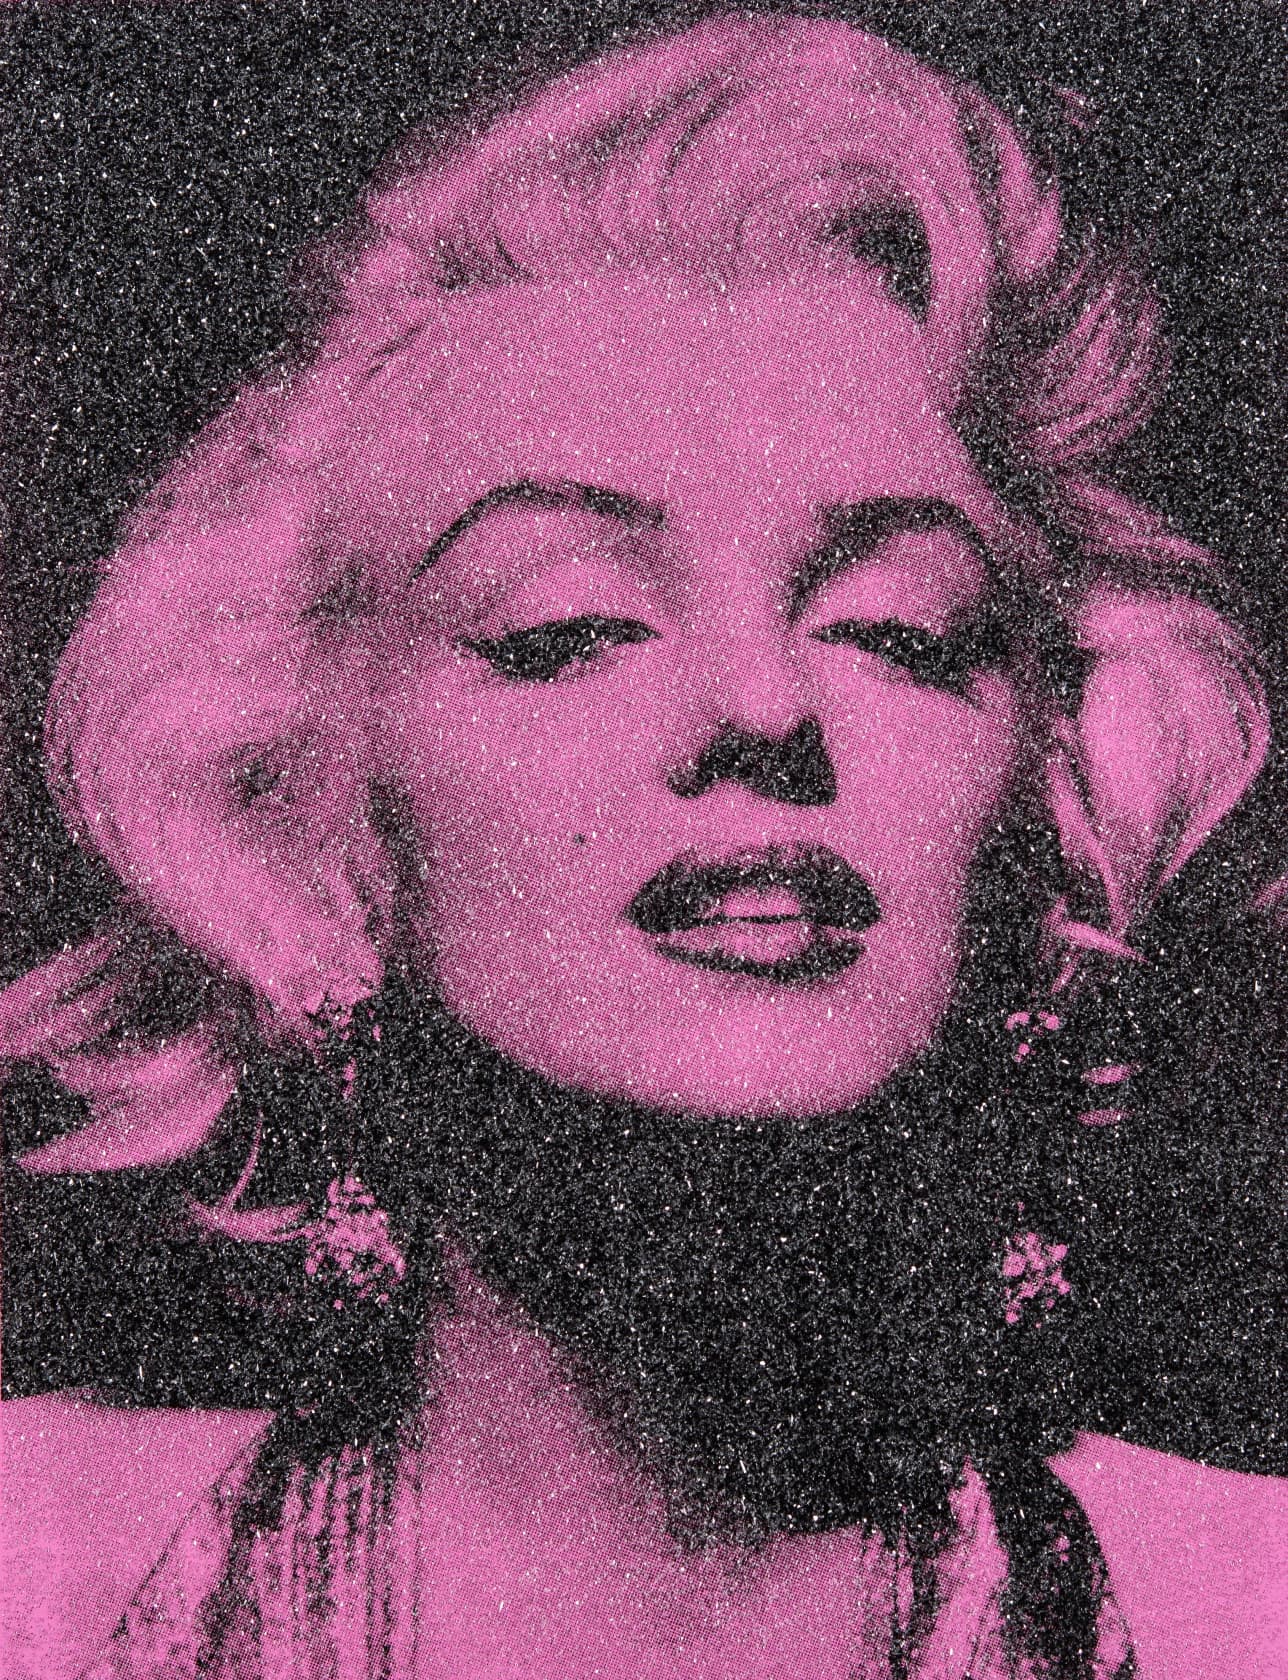 Russell Young Marilyn Portrait California Enamel and Diamond Dust Screen Print on Linen